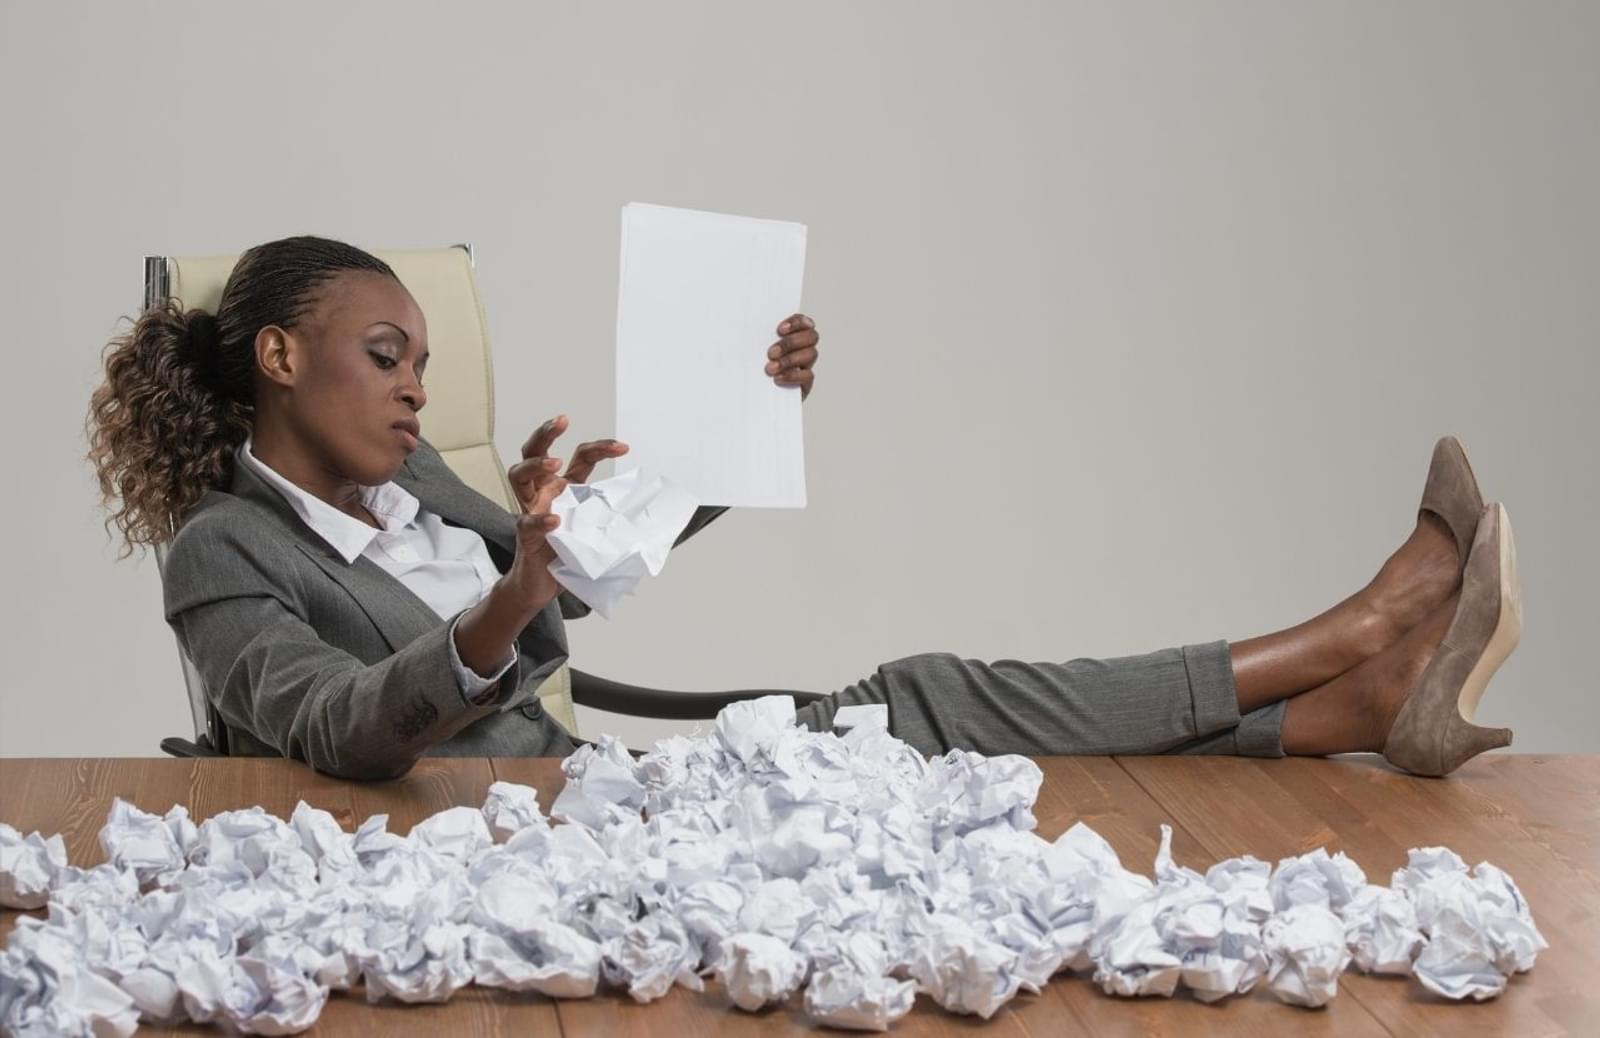 Business woman sitting with feet up on desk covered with balled-up paper